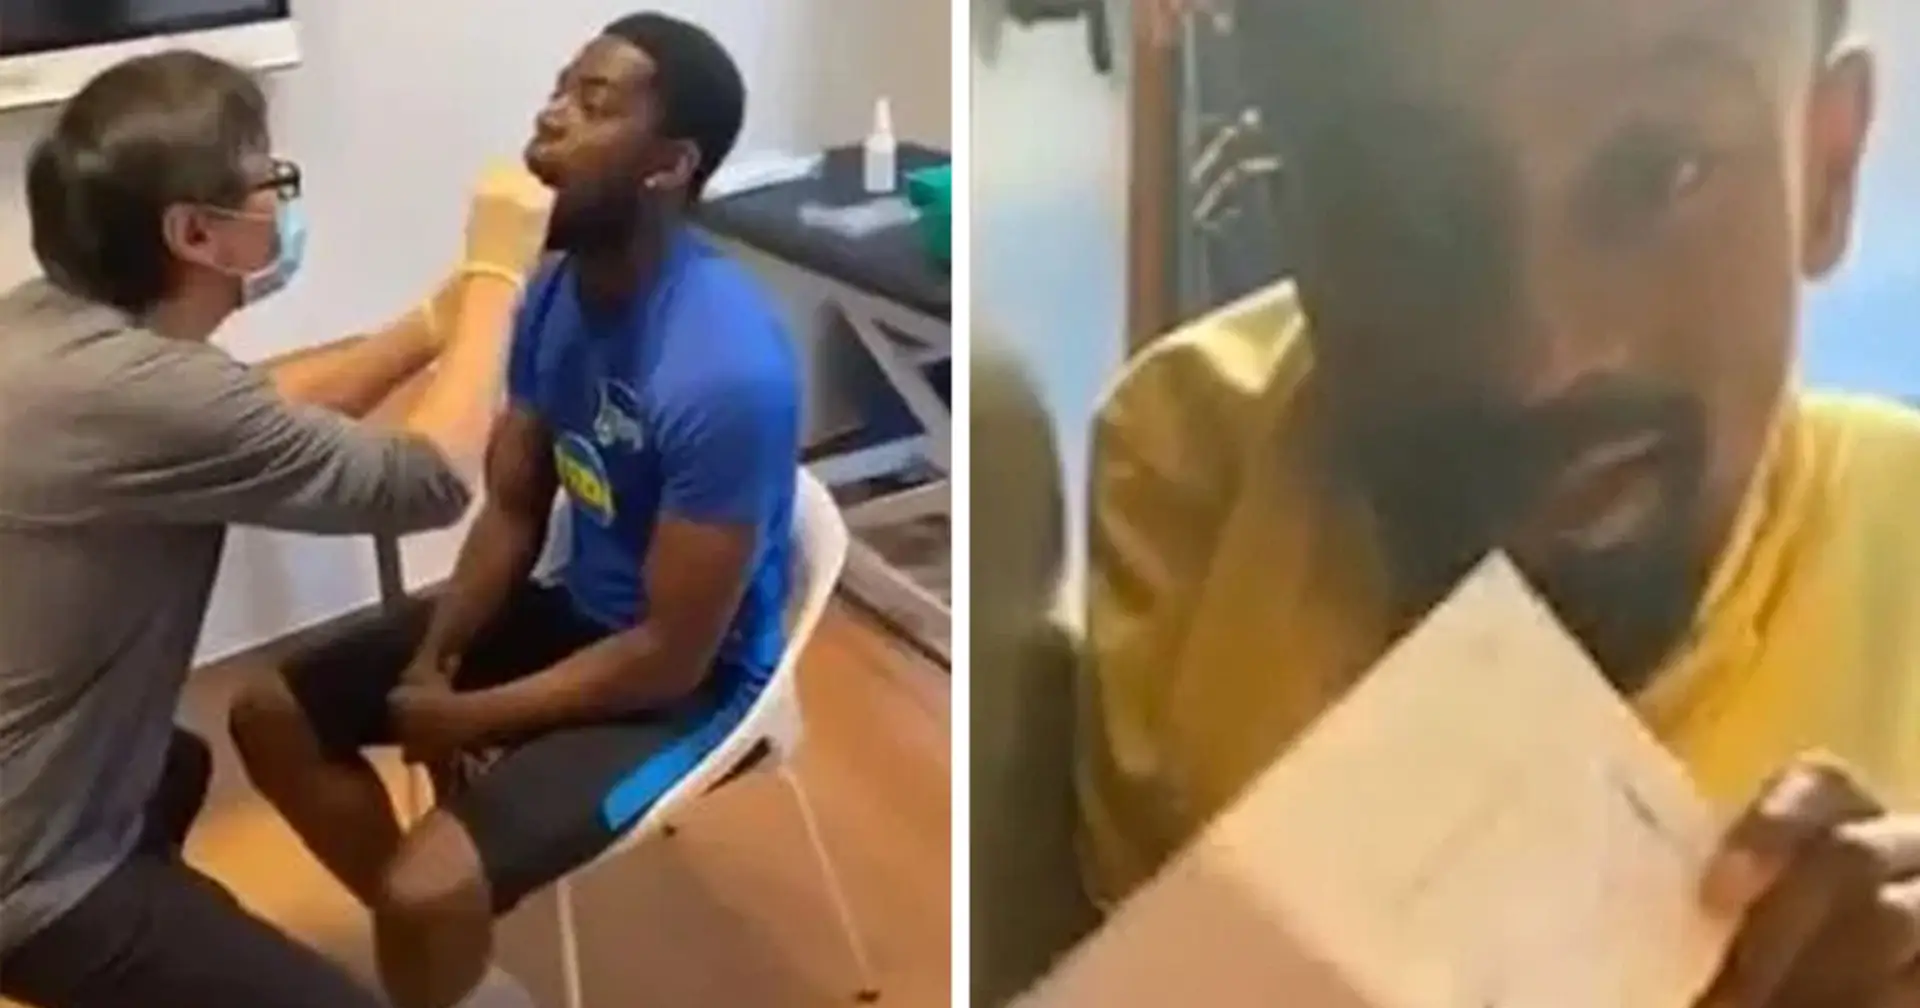 Hertha suspend Salomon Kalou as former Chelsea forward sings 'corona song', ignores social distancing rules and moans about pay cuts on video